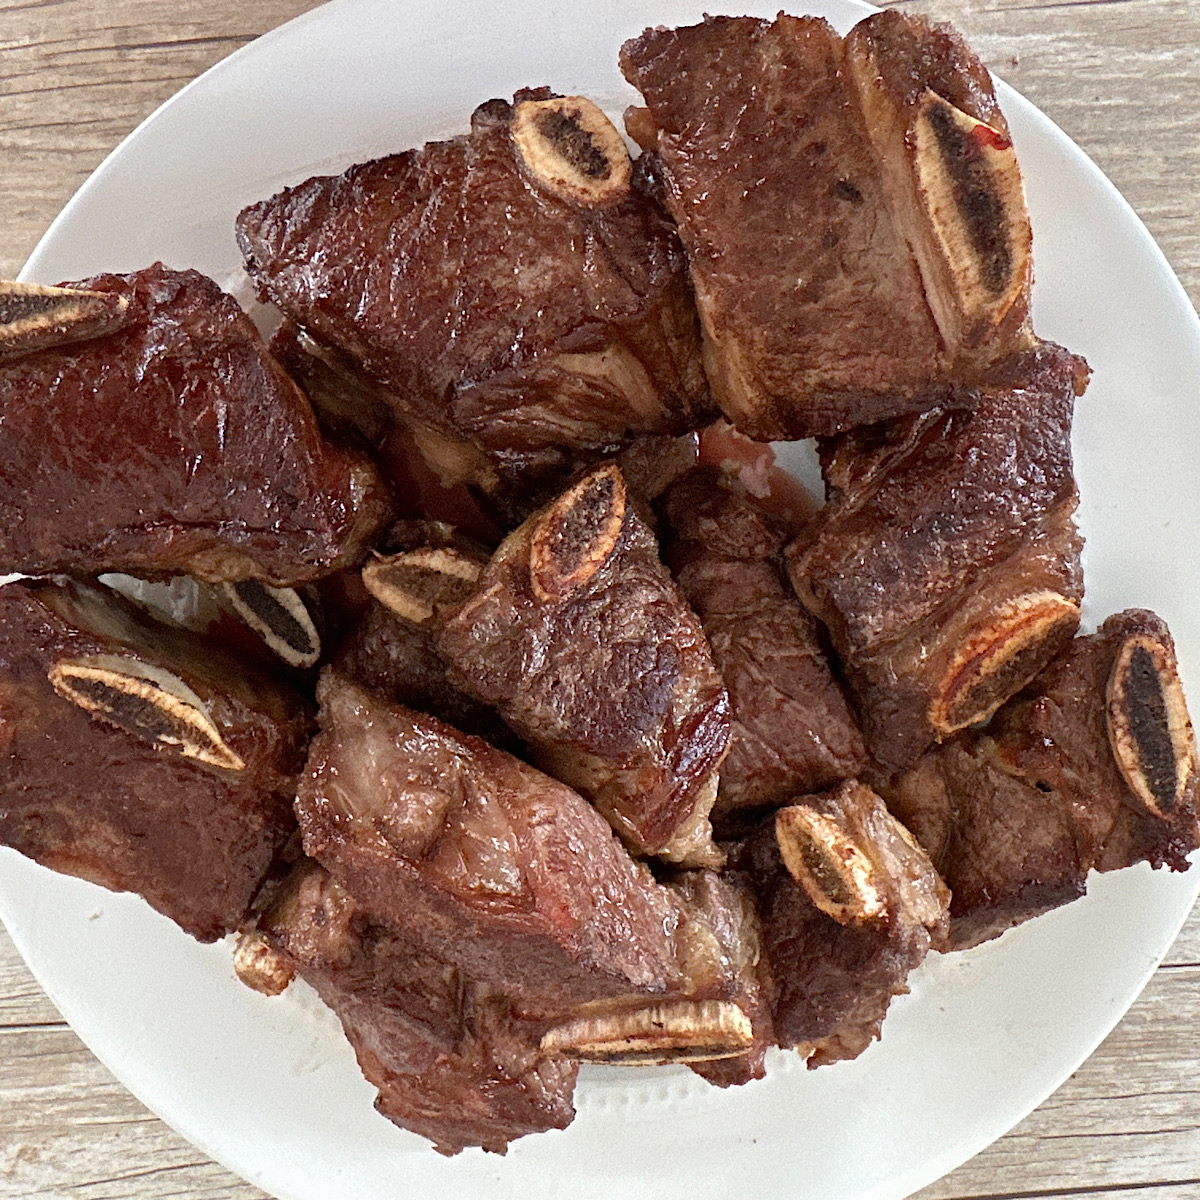 Beef short ribs sliced to 3” pieces on a white plate.